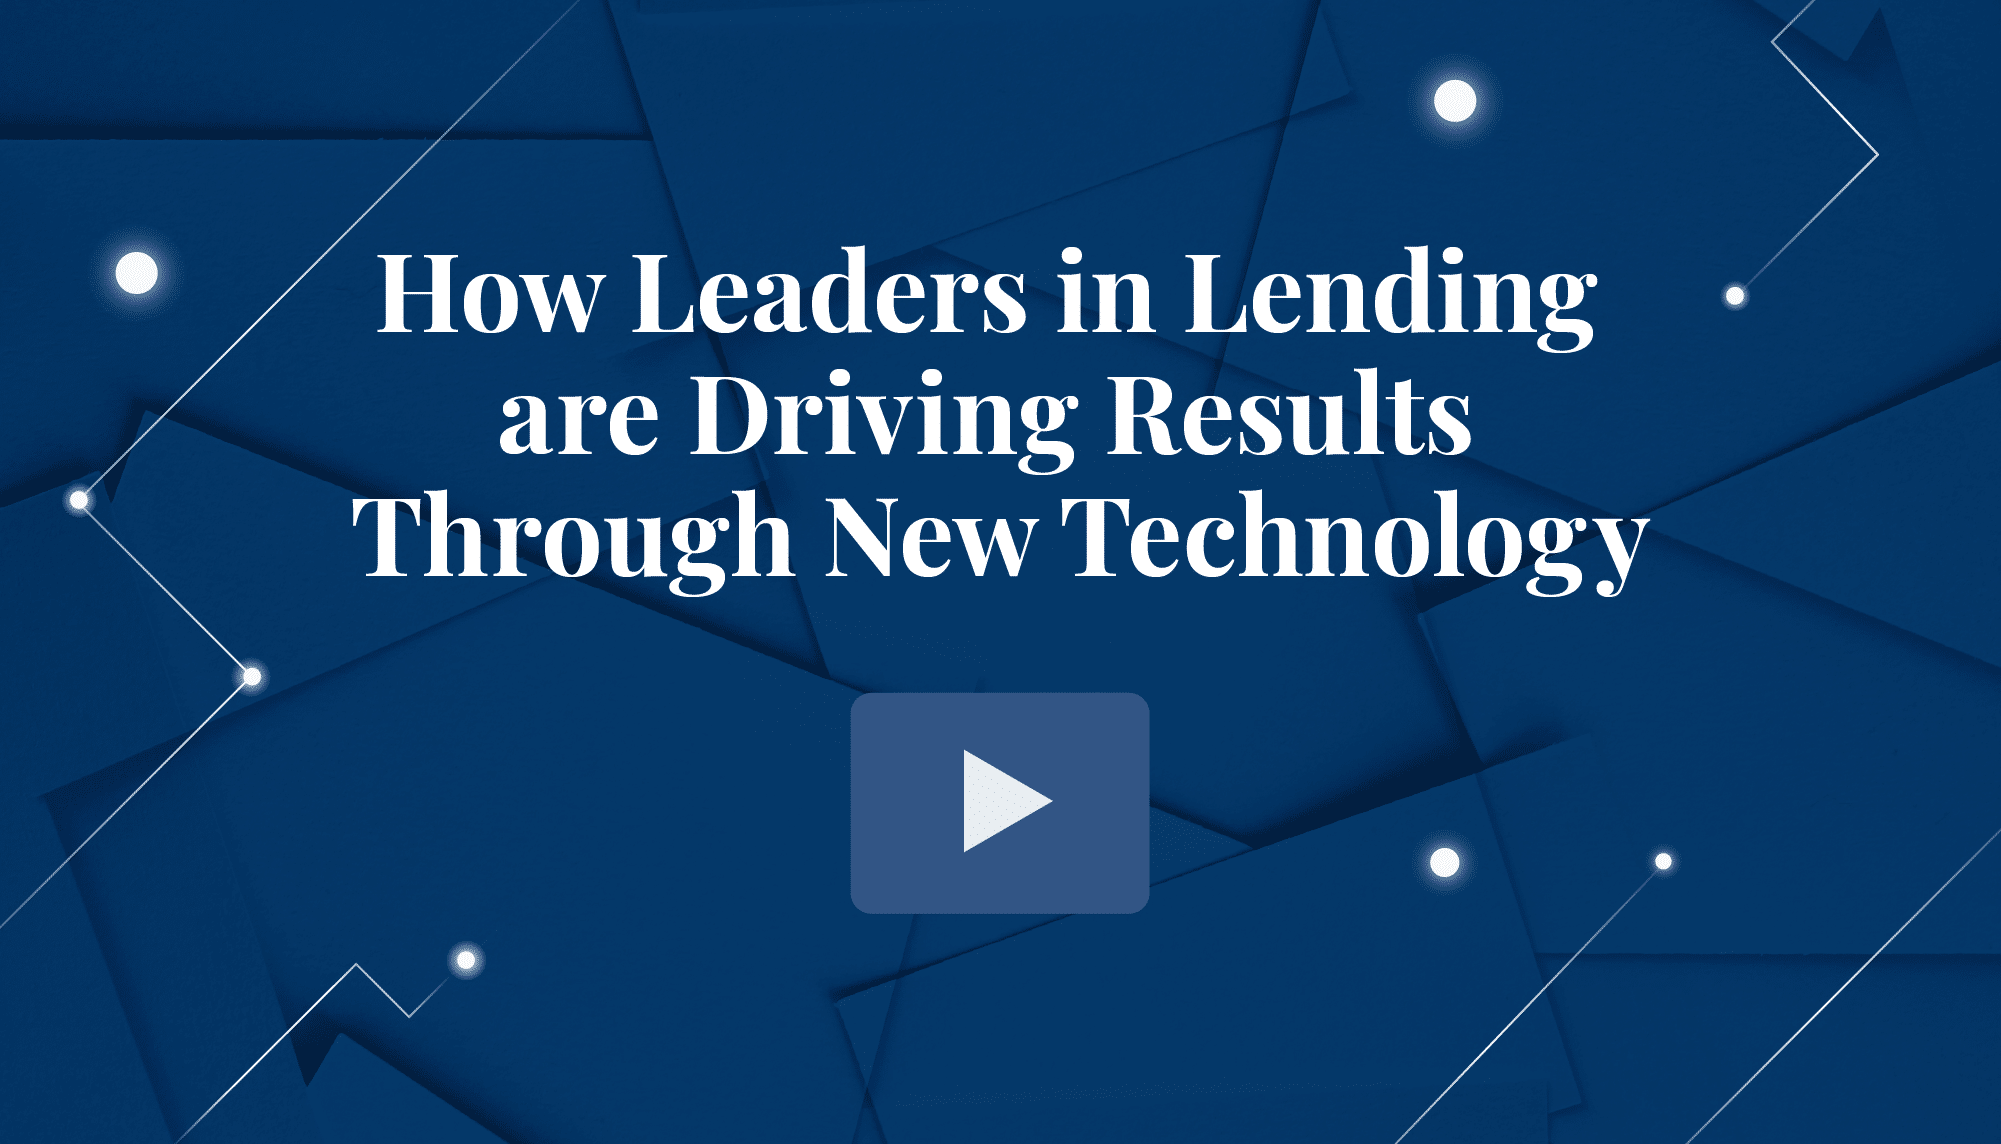 Watch: How Leaders in Lending Are Driving Results Through New Technology